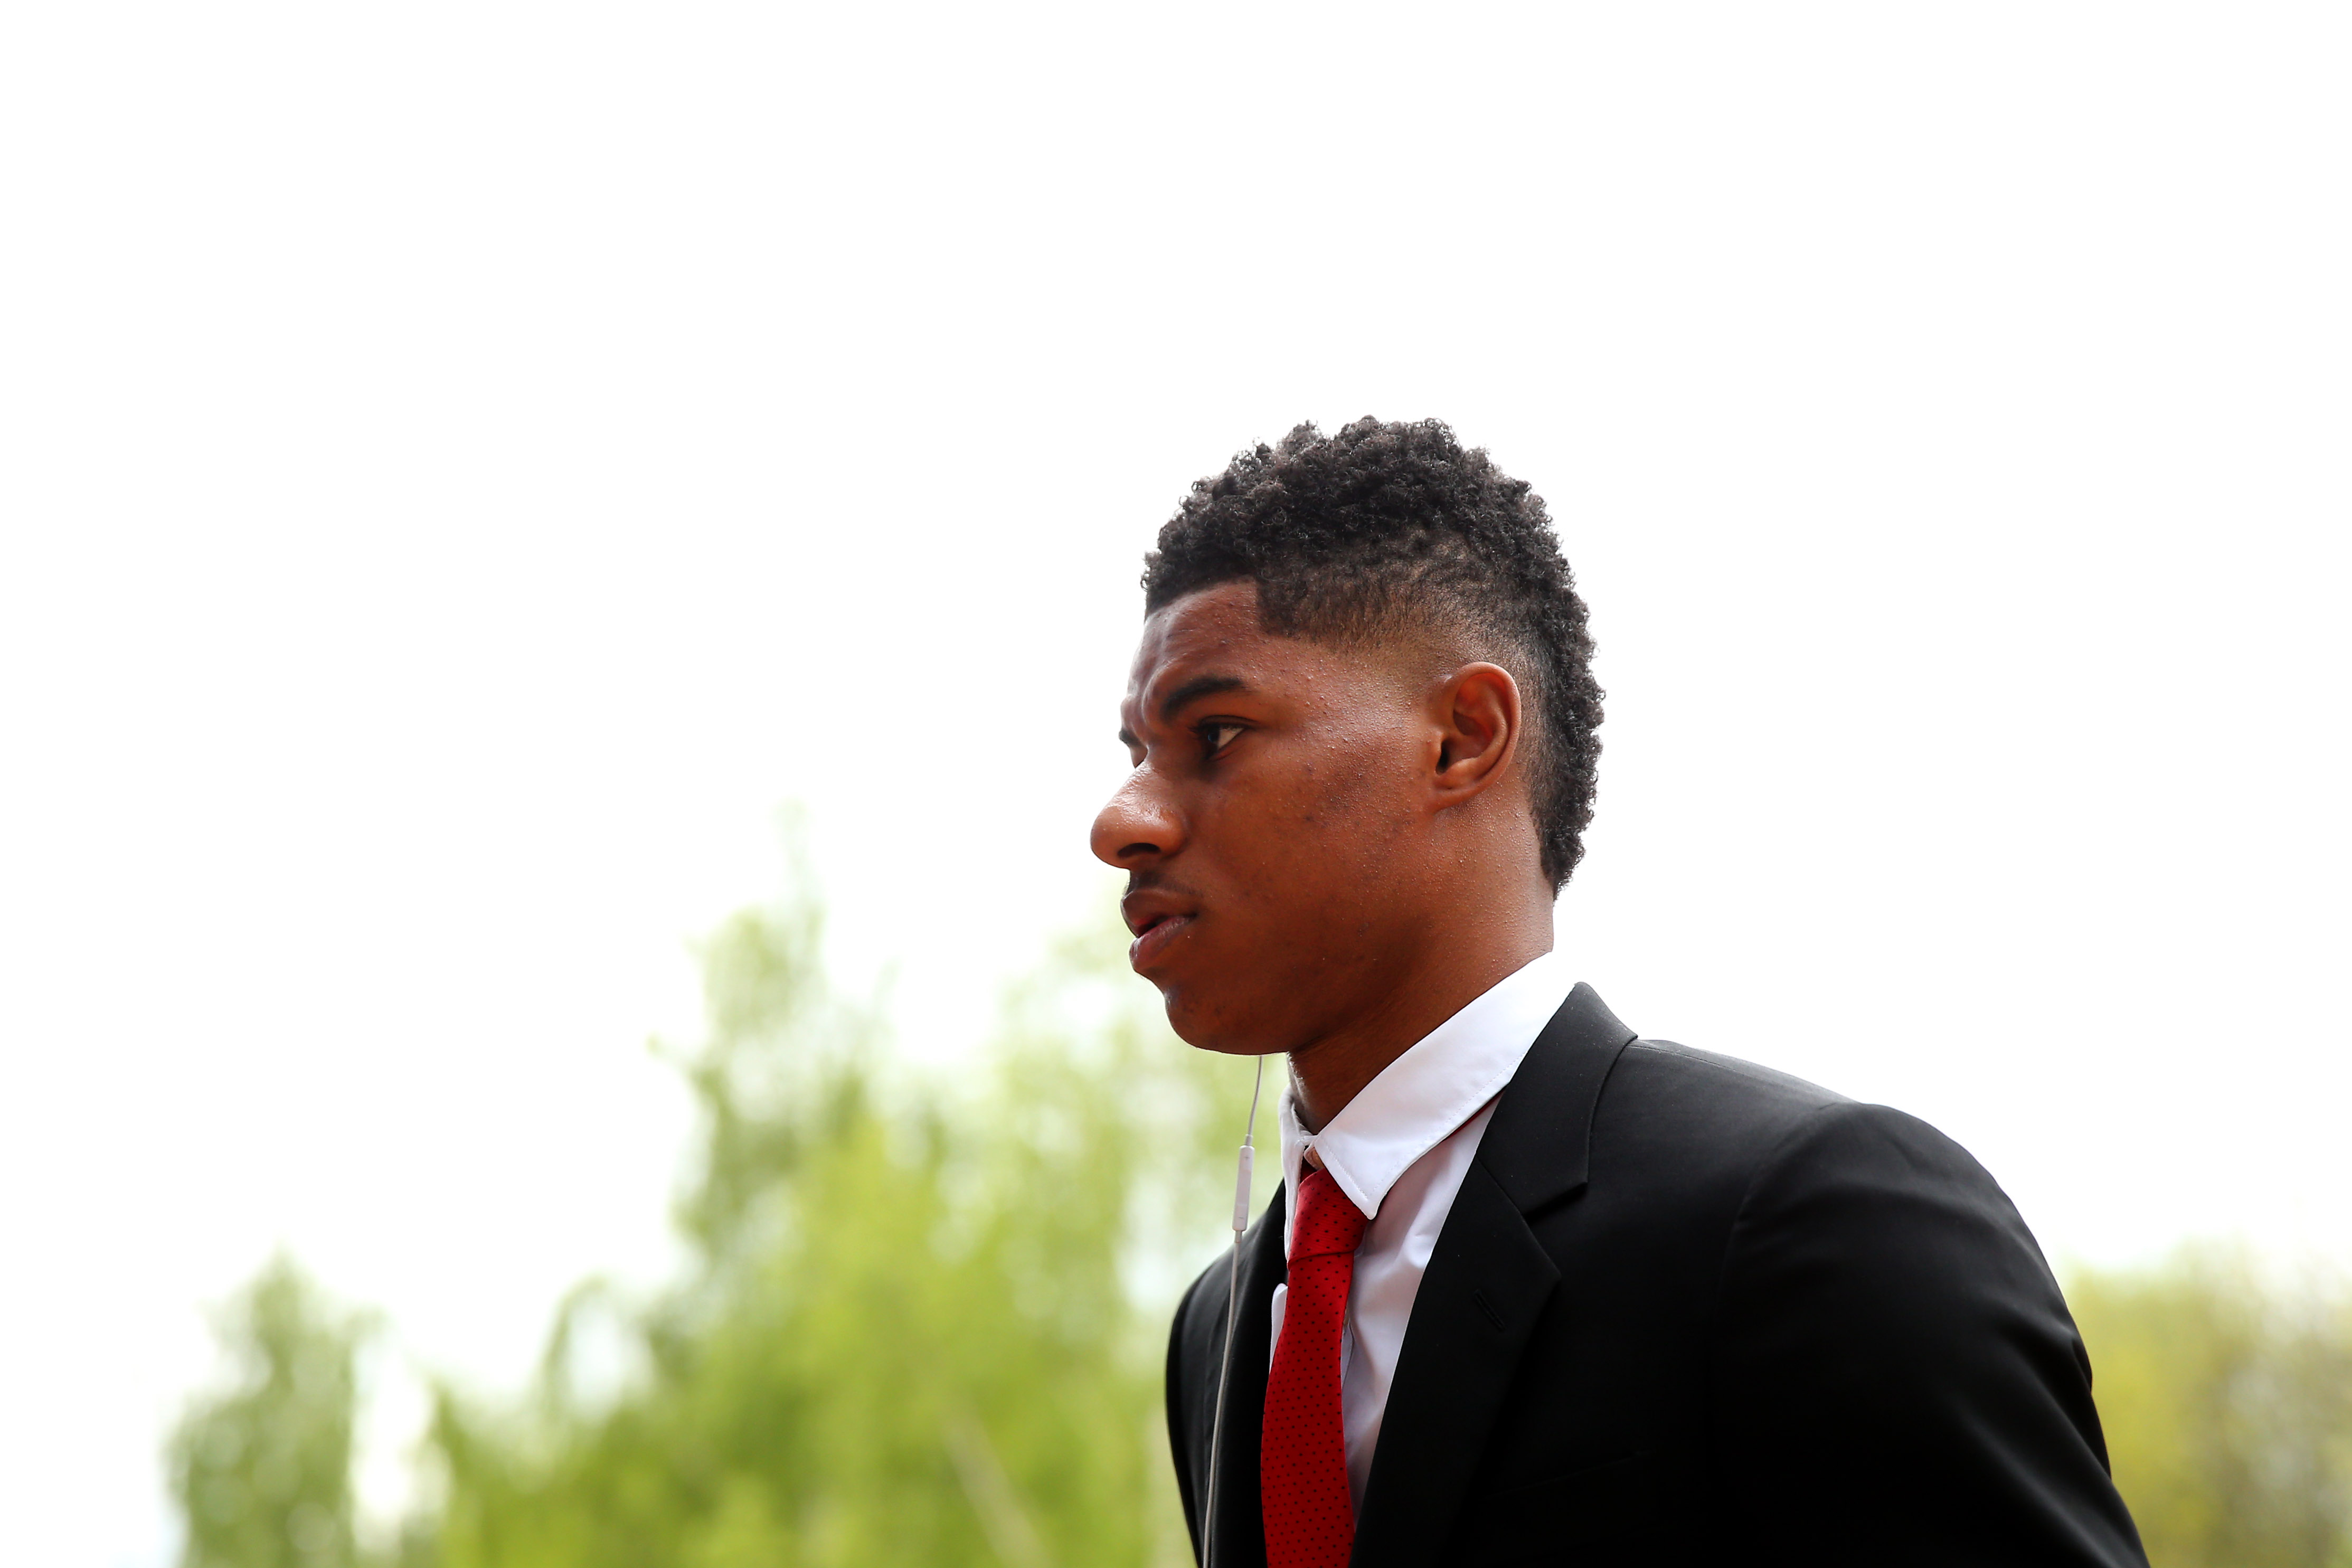 HUDDERSFIELD, ENGLAND - MAY 05:  Marcus Rashford of Manchester United arrives  prior to the Premier League match between Huddersfield Town and Manchester United at John Smith's Stadium on May 05, 2019 in Huddersfield, United Kingdom. (Photo by Alex Livesey/Getty Images)